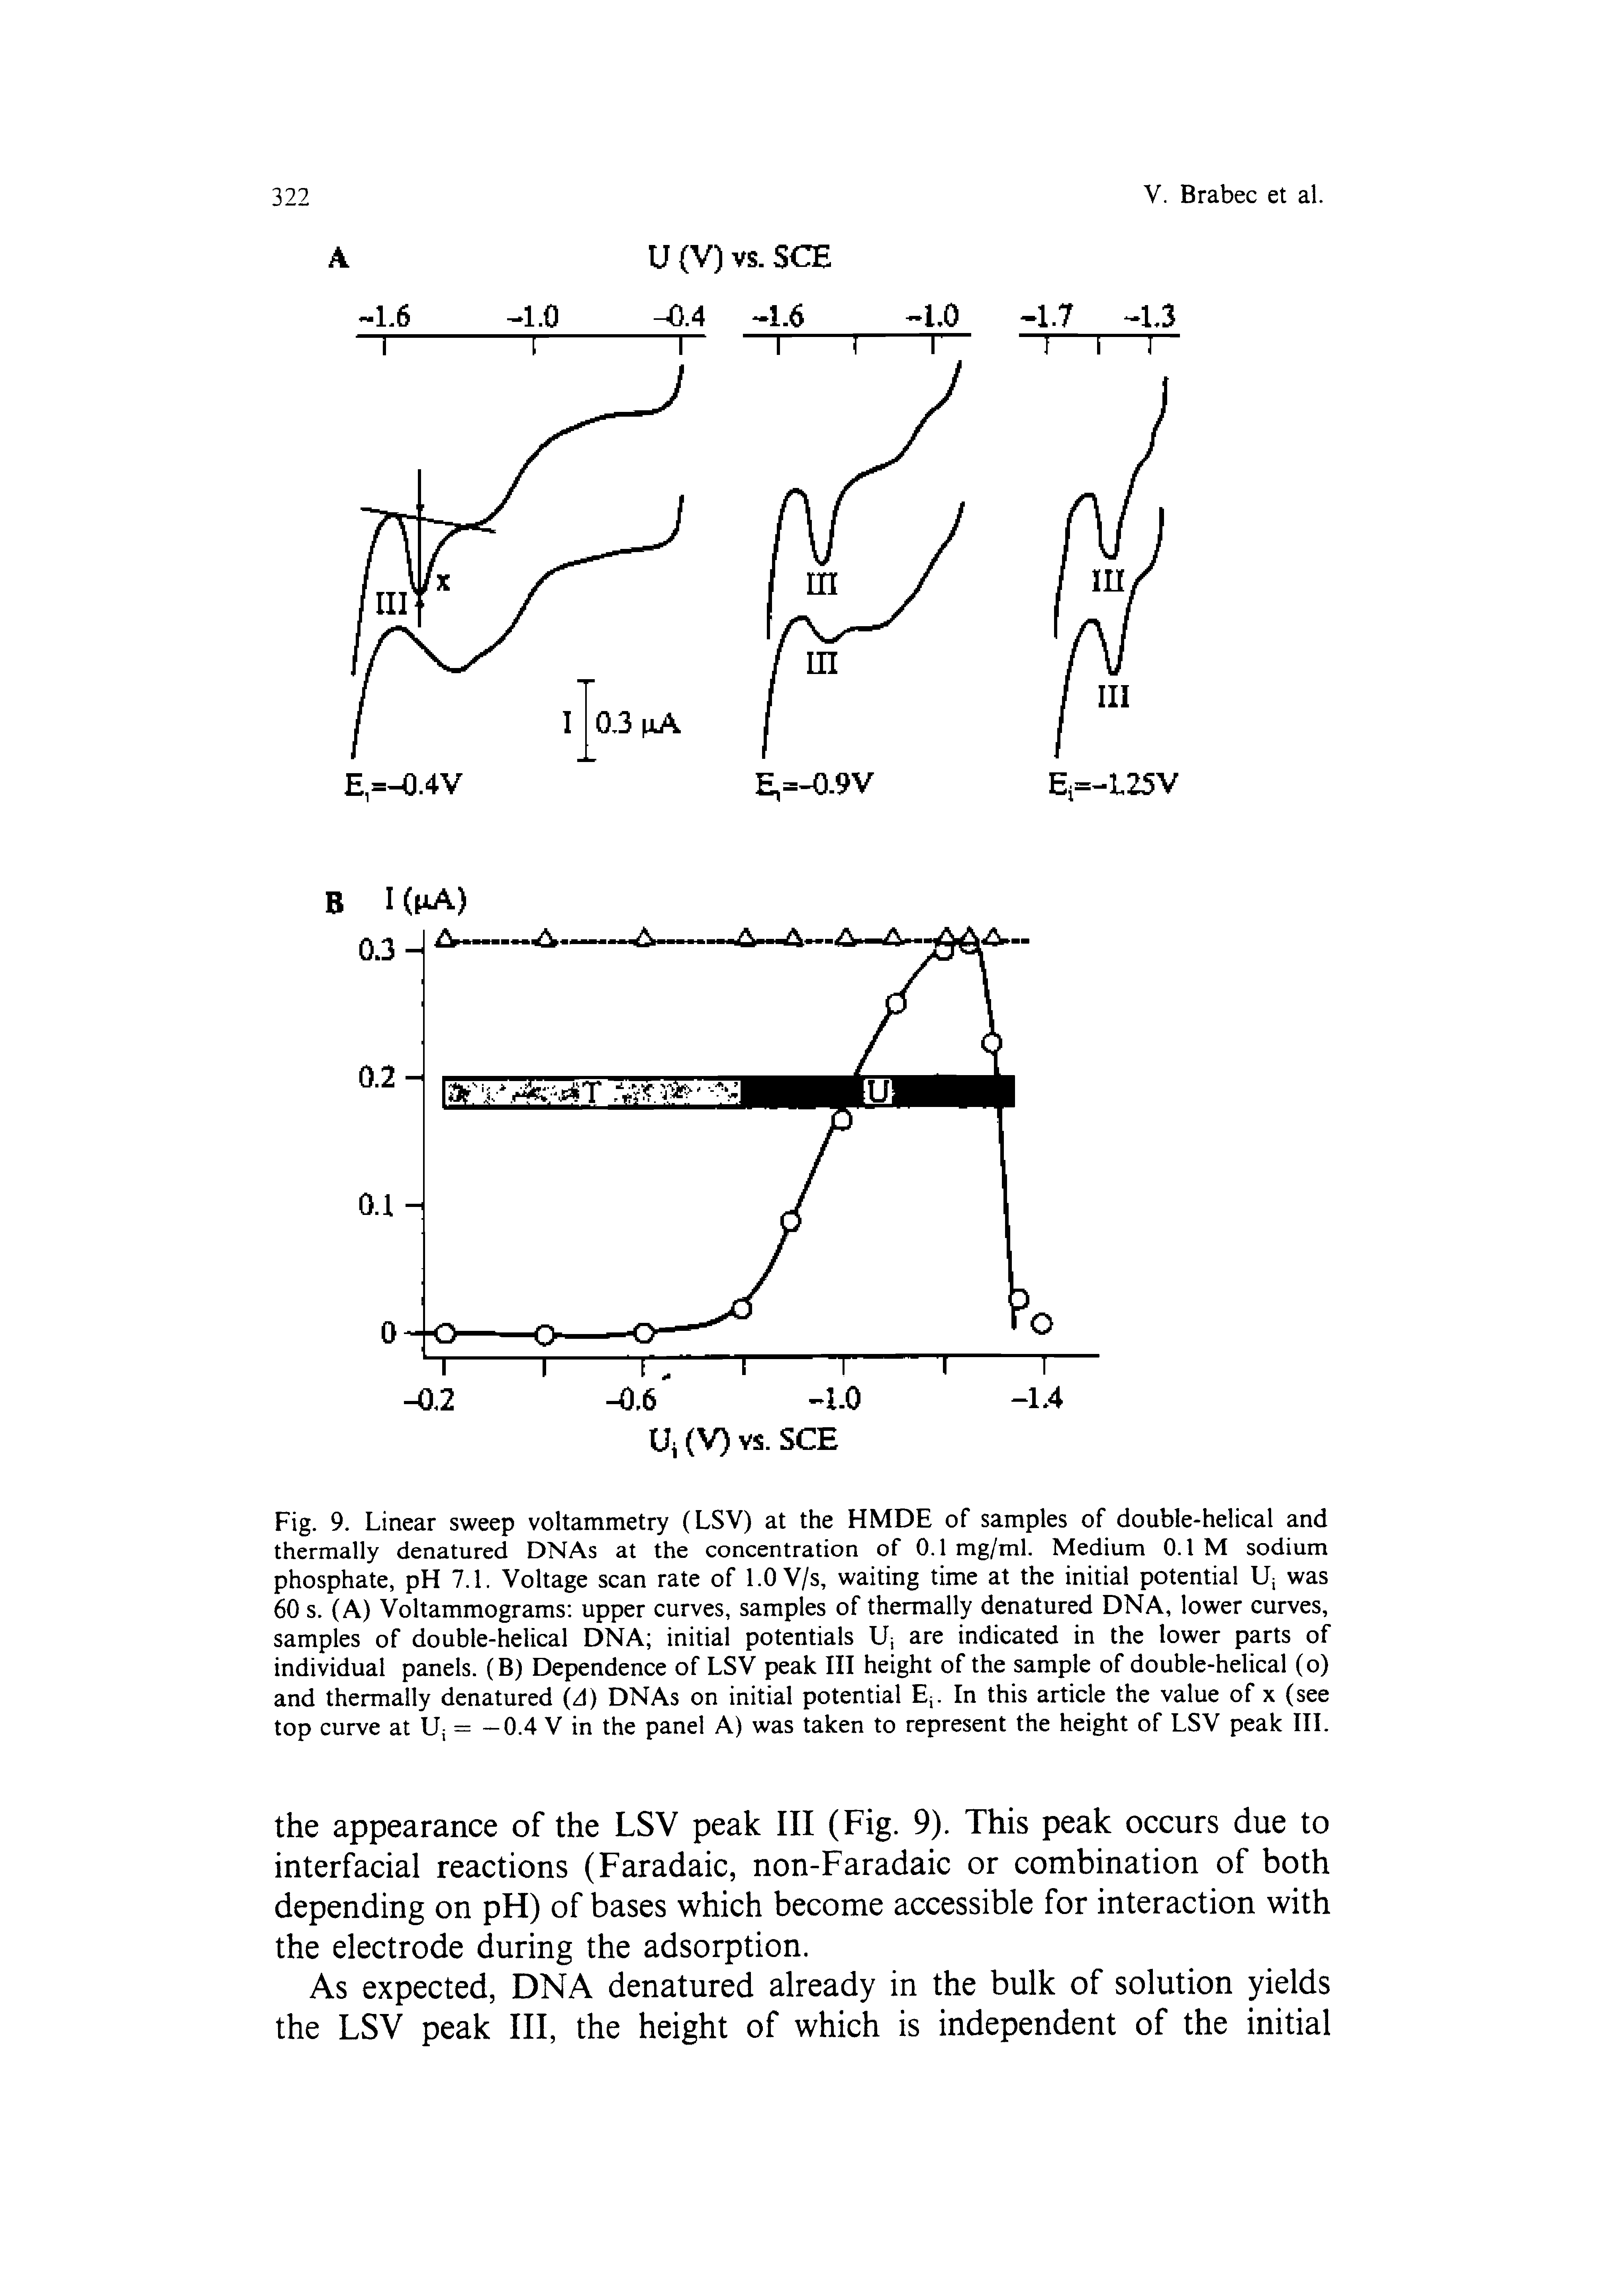 Fig. 9. Linear sweep voltammetry (LSV) at the HMDE of samples of double-helical and thermally denatured DNAs at the concentration of 0.1 mg/ml. Medium 0.1 M sodium phosphate, pH 7.1. Voltage scan rate of 1.0 V/s, waiting time at the initial potential Uj was 60 s. (A) Voltammograms upper curves, samples of thermally denatured DNA, lower curves, samples of double-helical DNA initial potentials Uj are indicated in the lower parts of individual panels. (B) Dependence of LSV peak III height of the sample of double-helical (o) and thermally denatured (d) DNAs on initial potential Ej. In this article the value of x (see top curve at LFj = -0.4 V in the panel A) was taken to represent the height of LSV peak III.